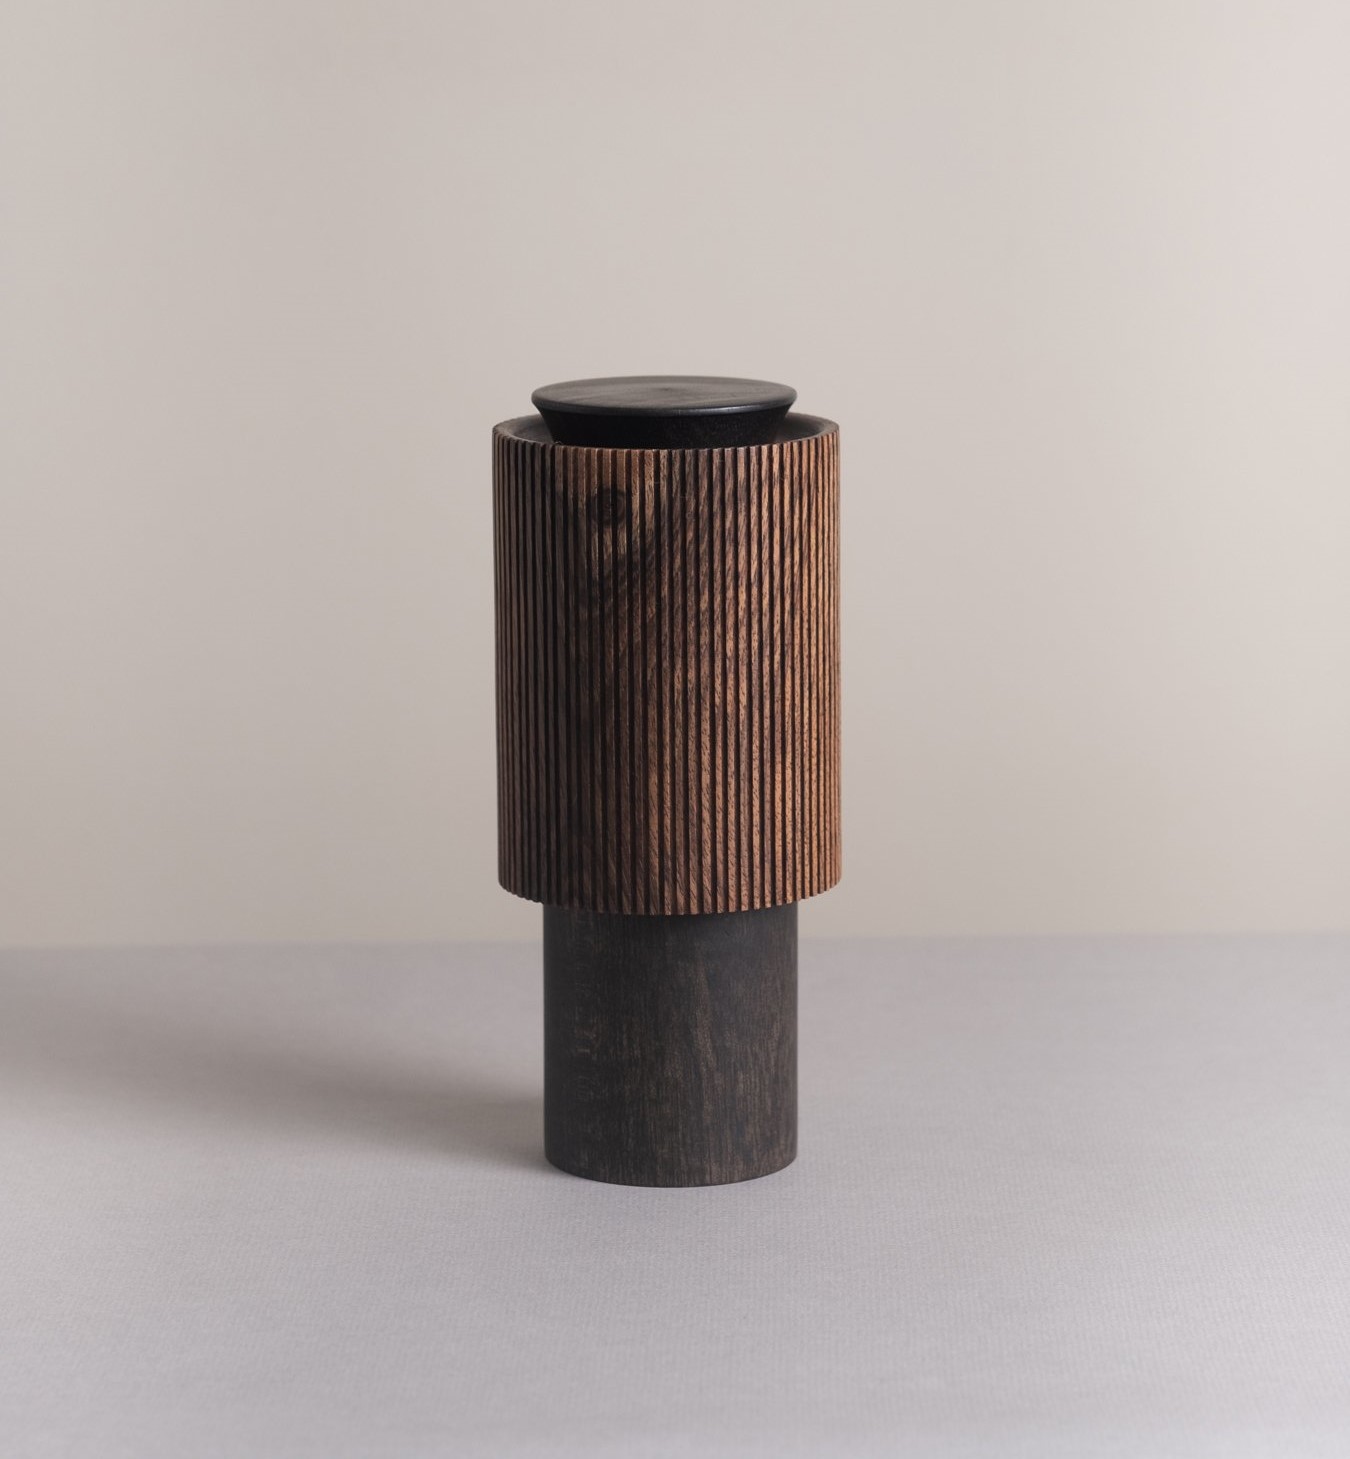 Functional Artistry - Wooden Mills by Woo-Lam Choi 5